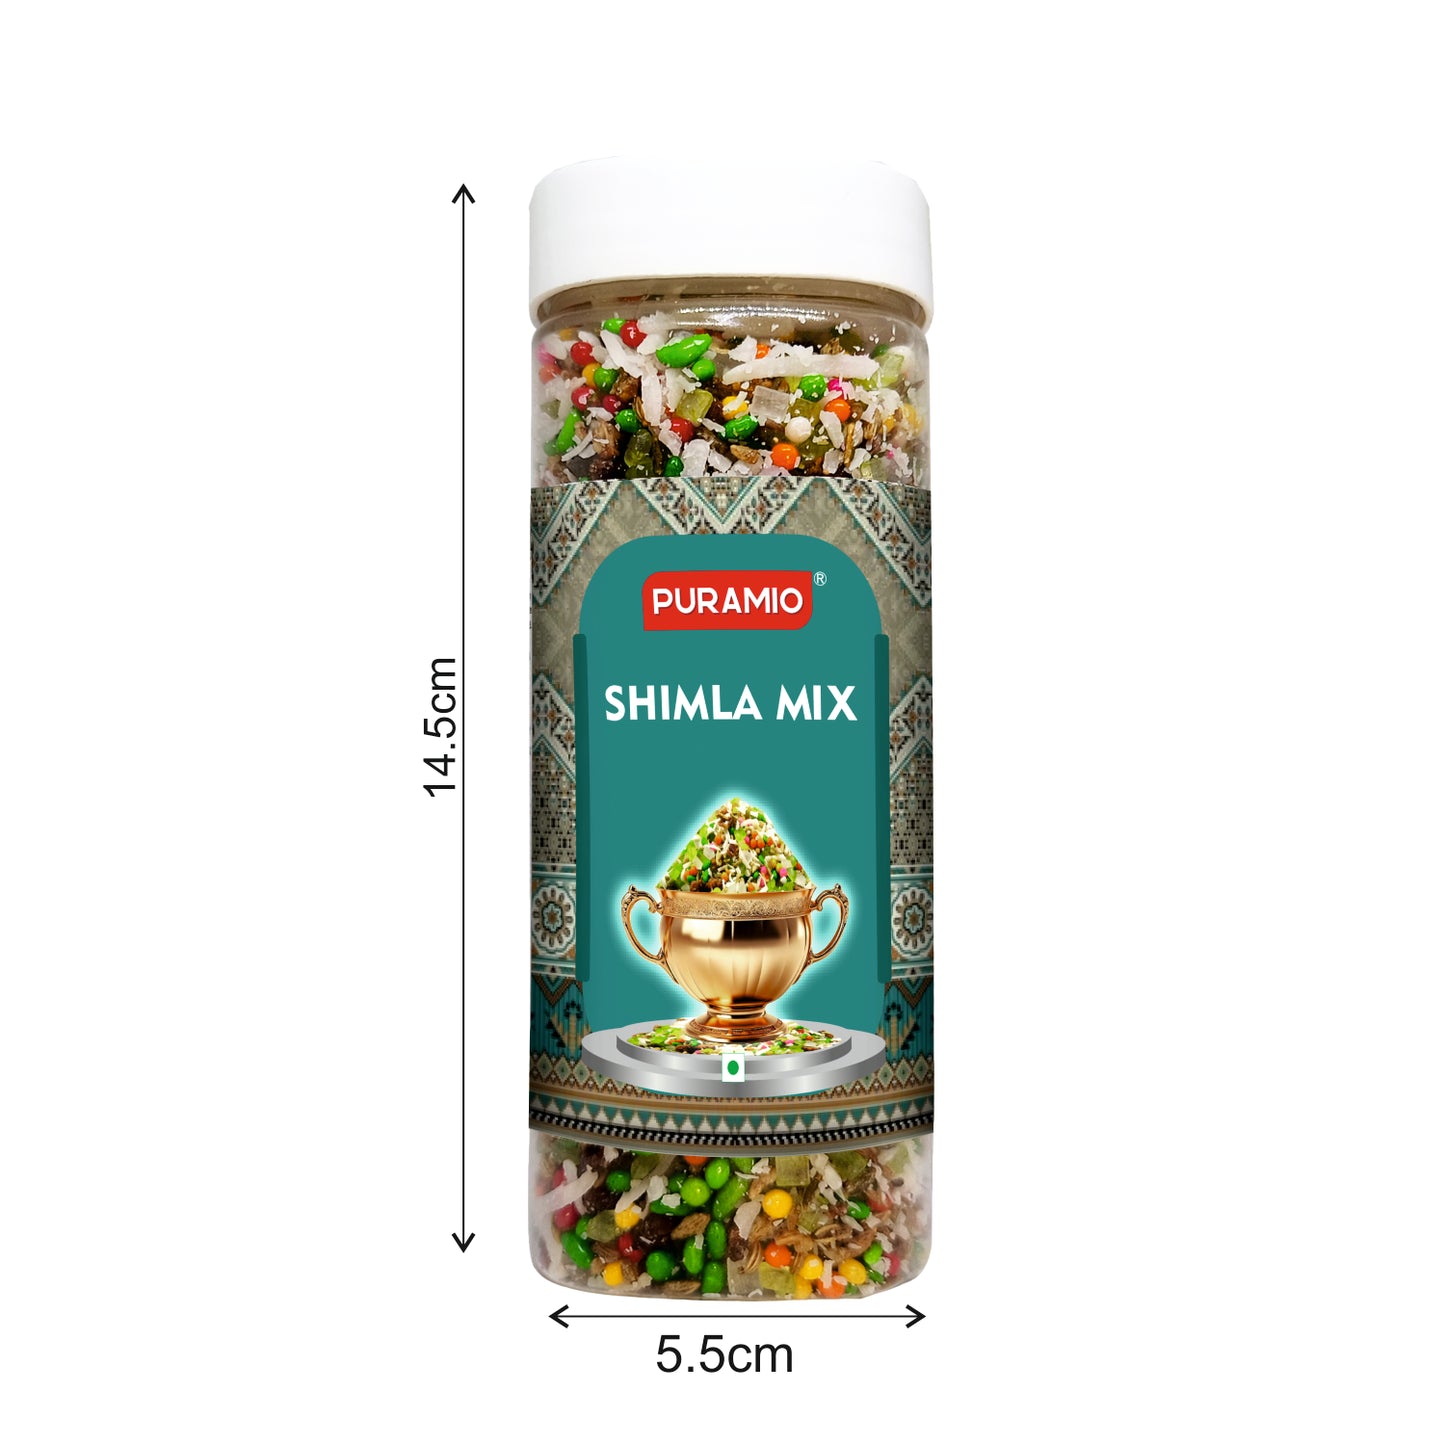 Puramio Shimla Mix | Pure and Premium Mukhwas Mouth Freshener | Thandai Mint Saunf | Good for Bad Breath, Good for Digestion, After Meal and Drink, 220g